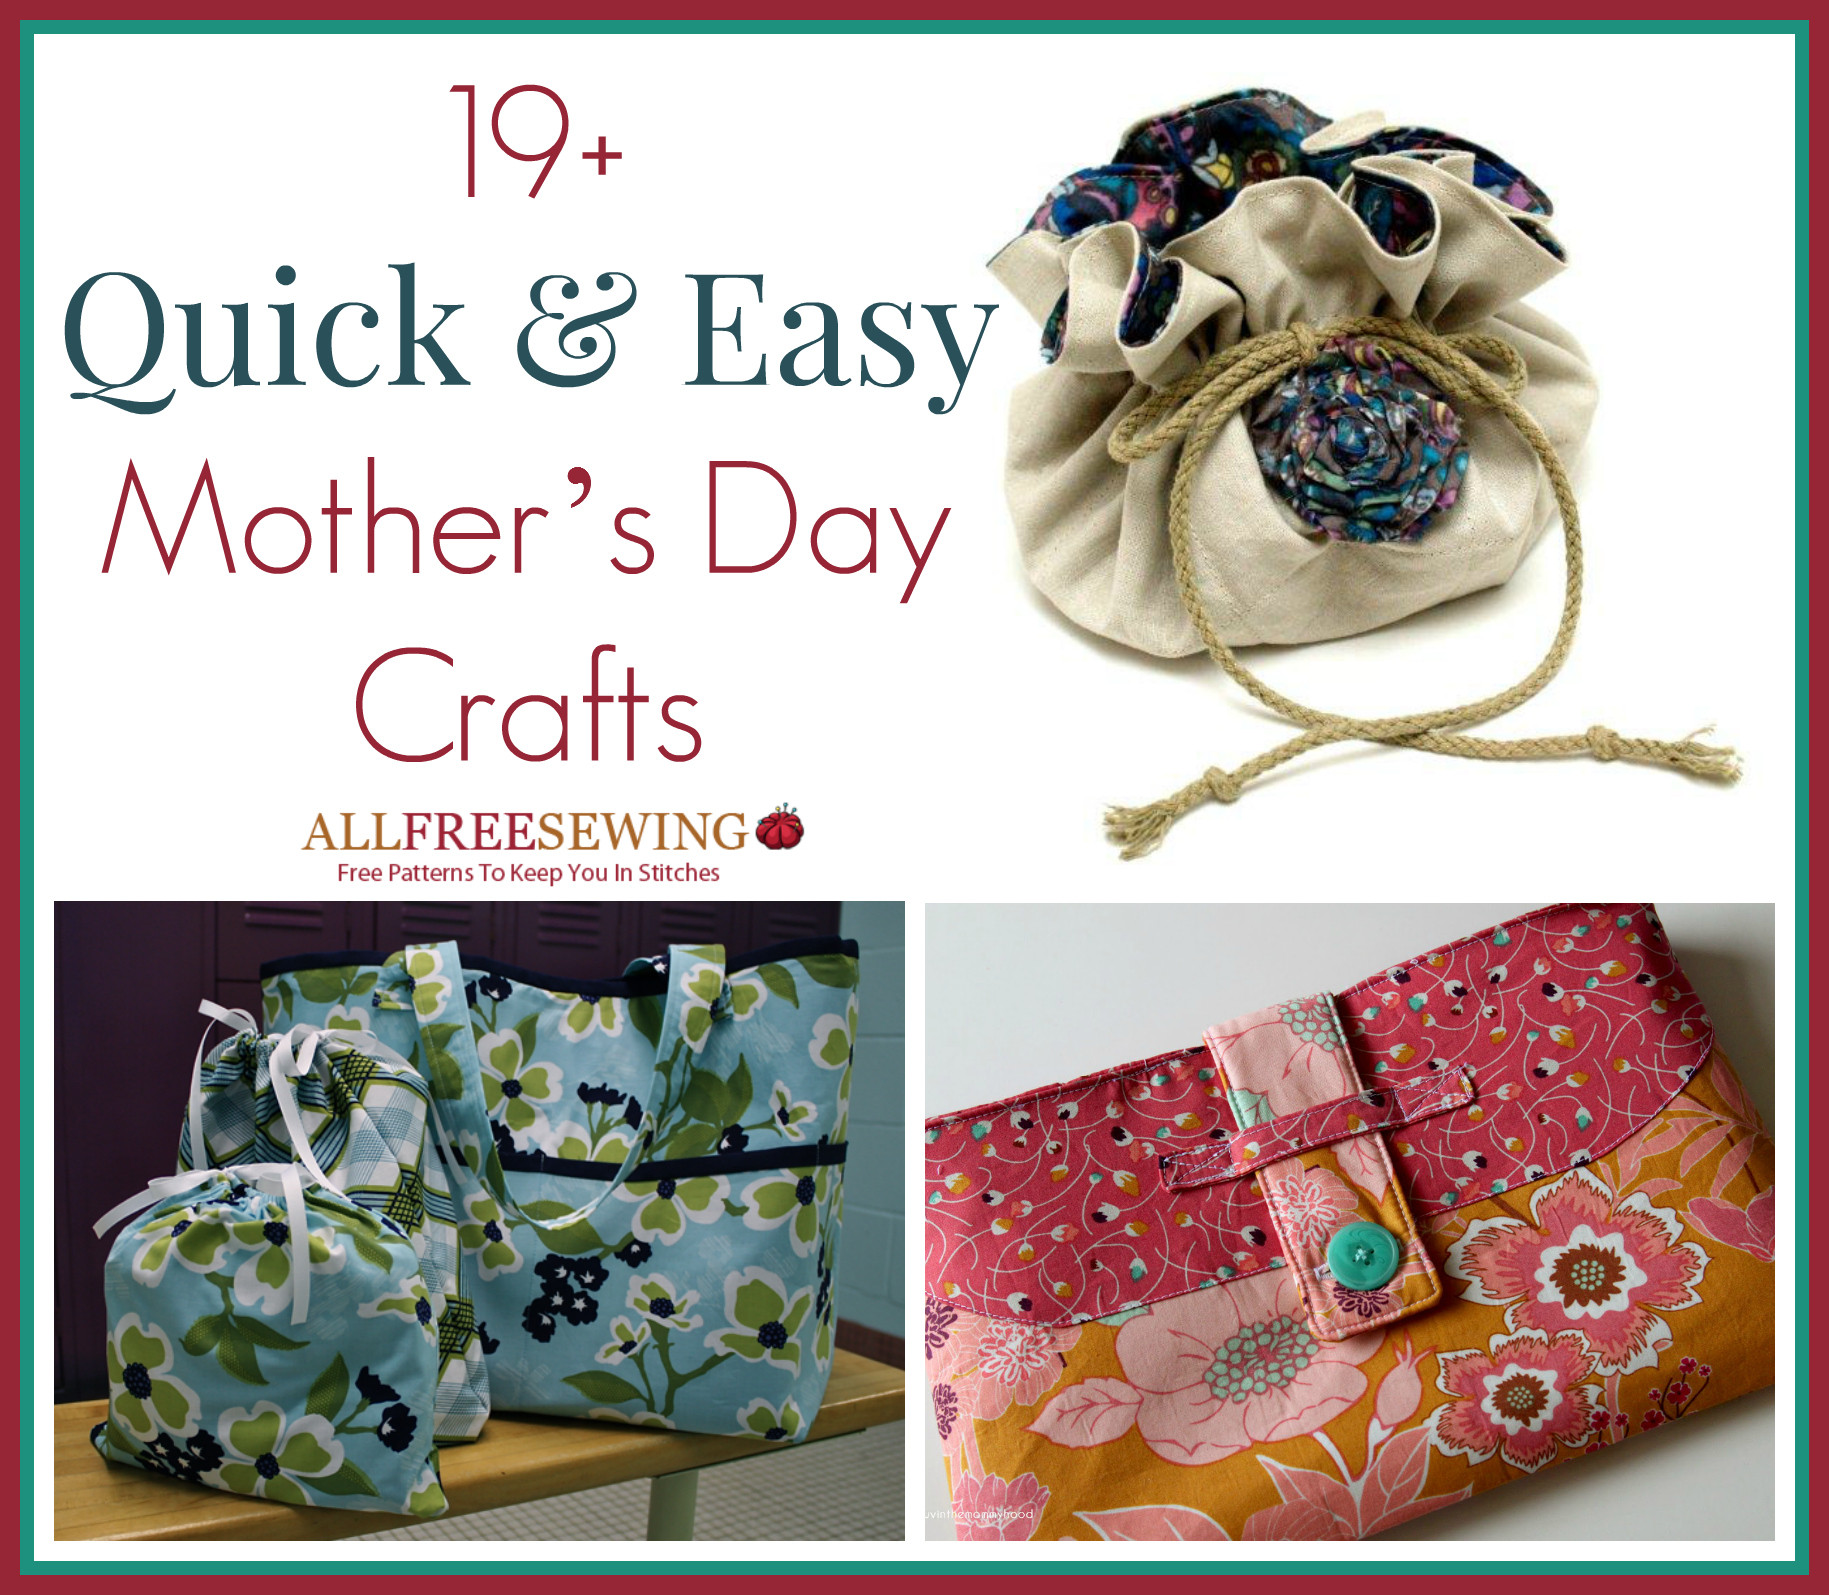 Quick And Easy Mother's Day Gifts
 19 Quick & Easy Mother s Day Crafts FaveCrafts